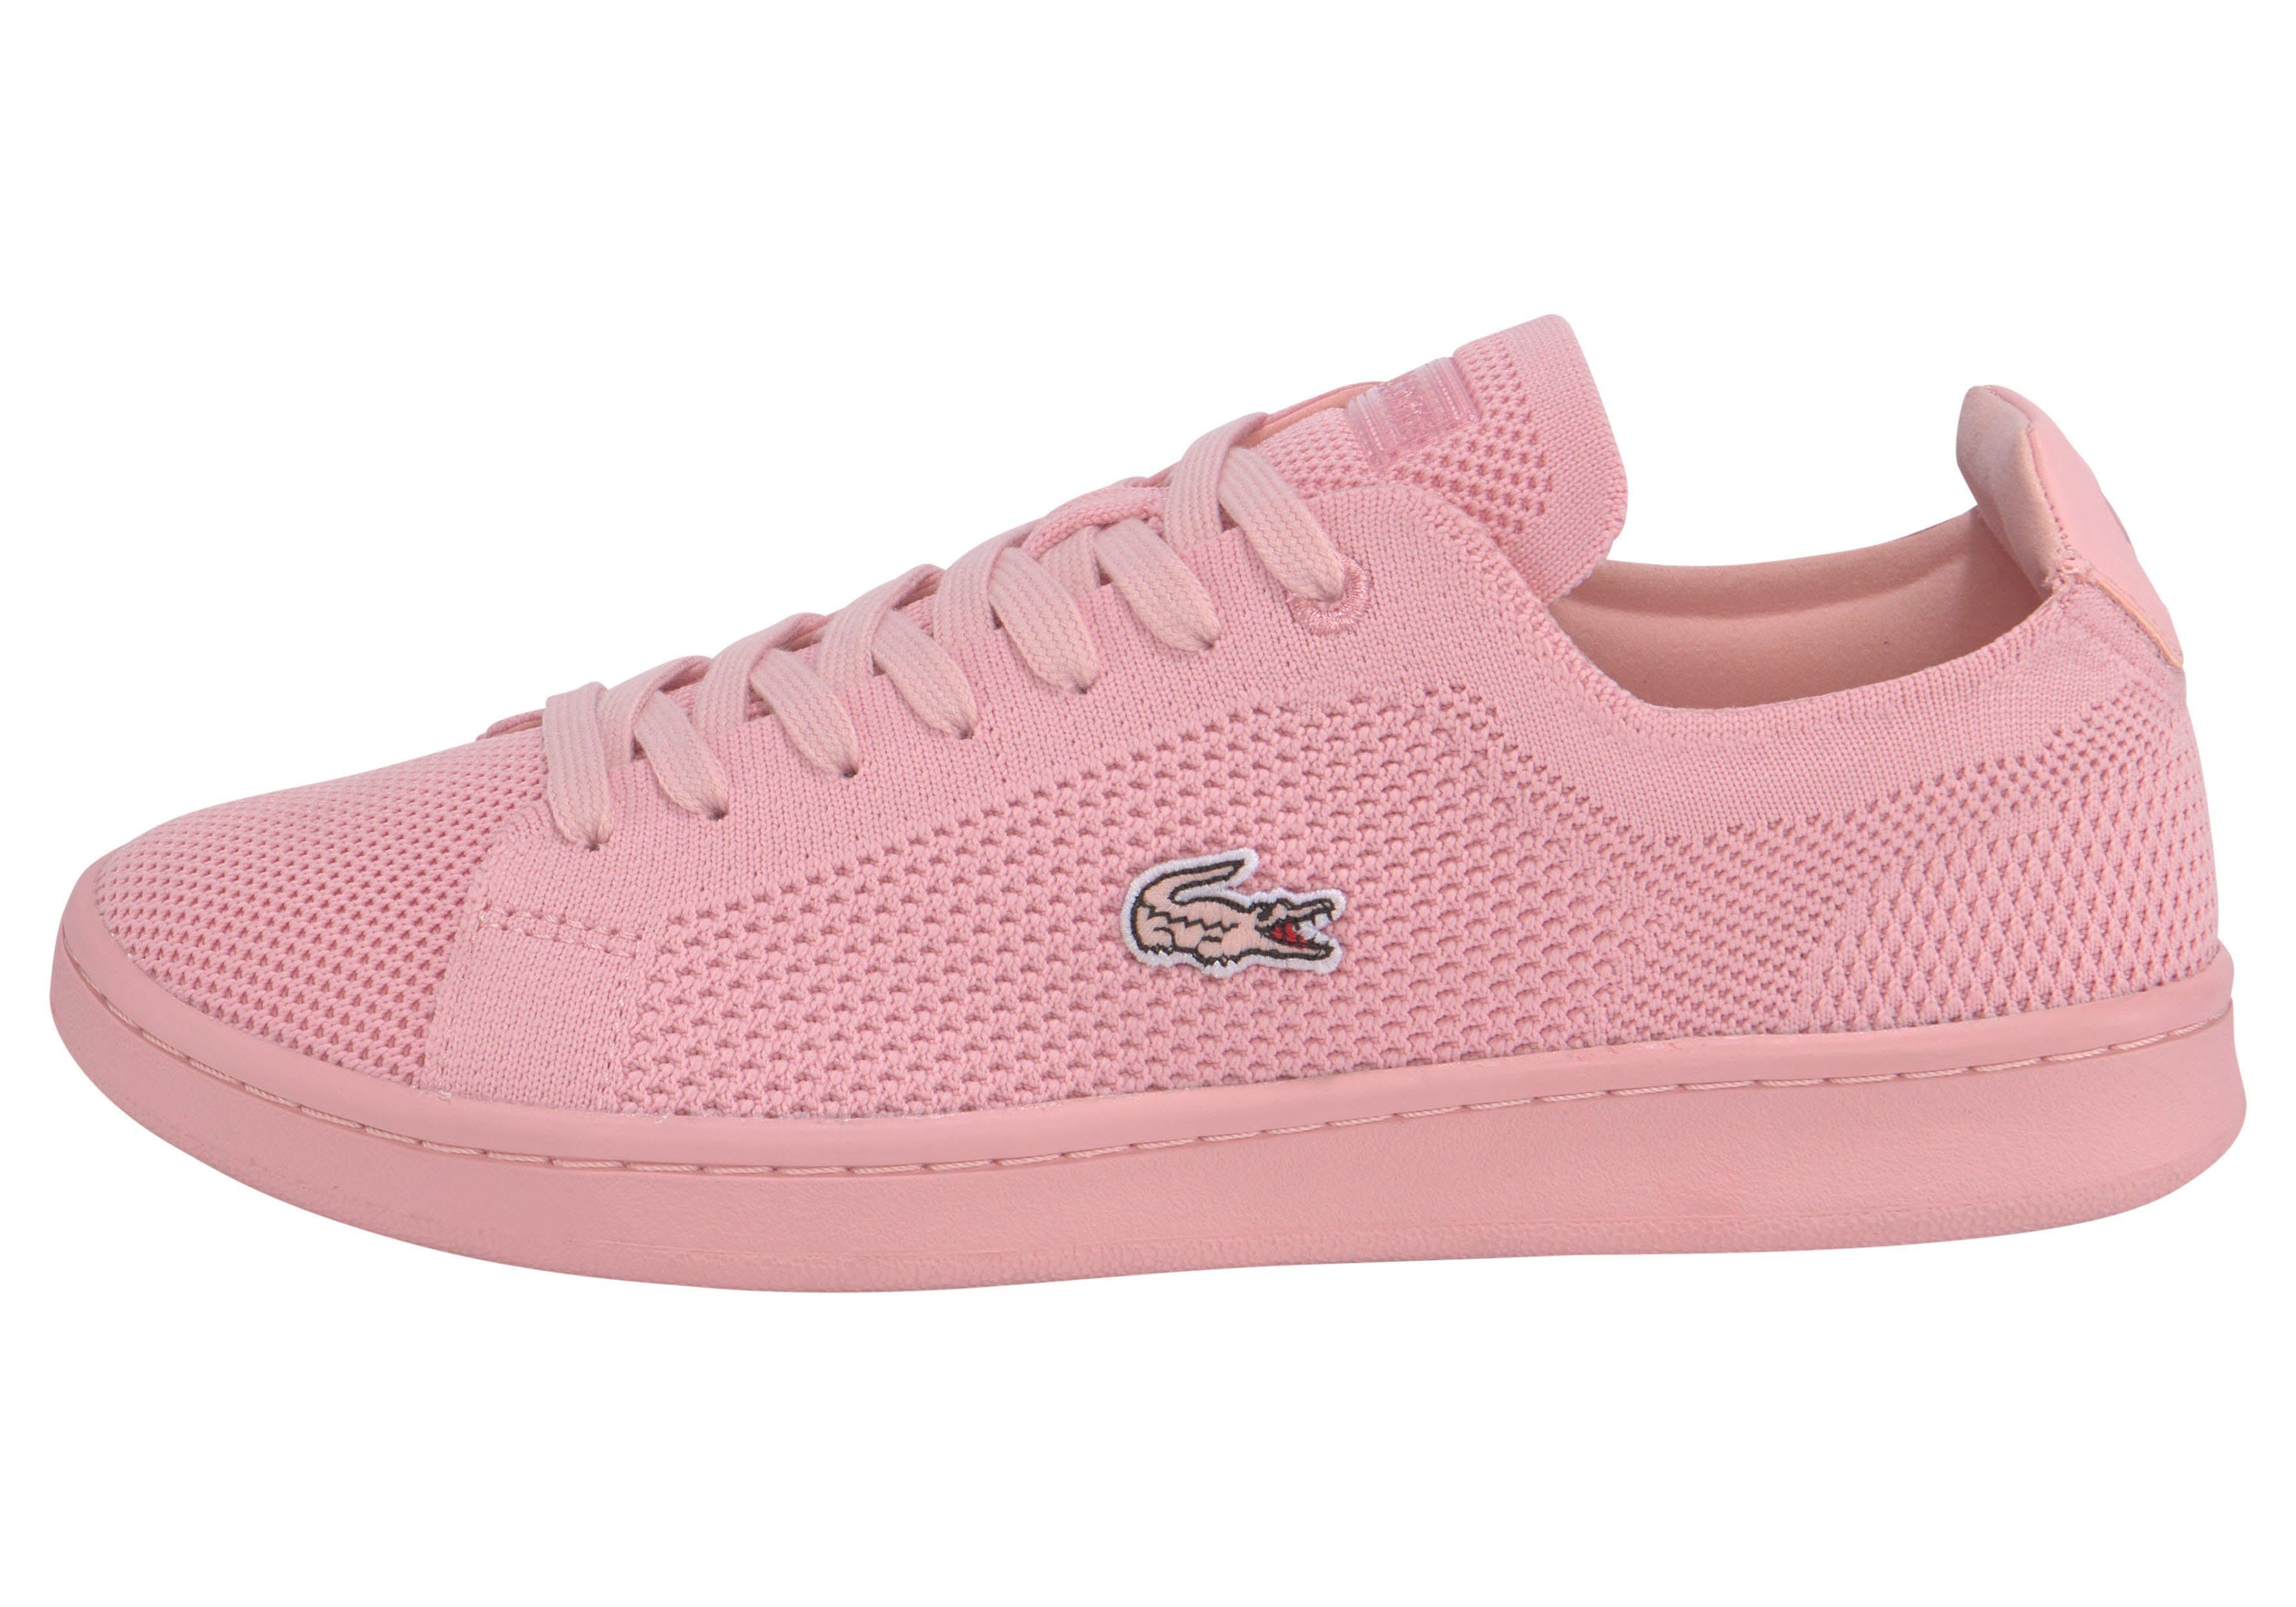 SFA Sneaker Lacoste pink 123 1 PIQUEE CARNABY